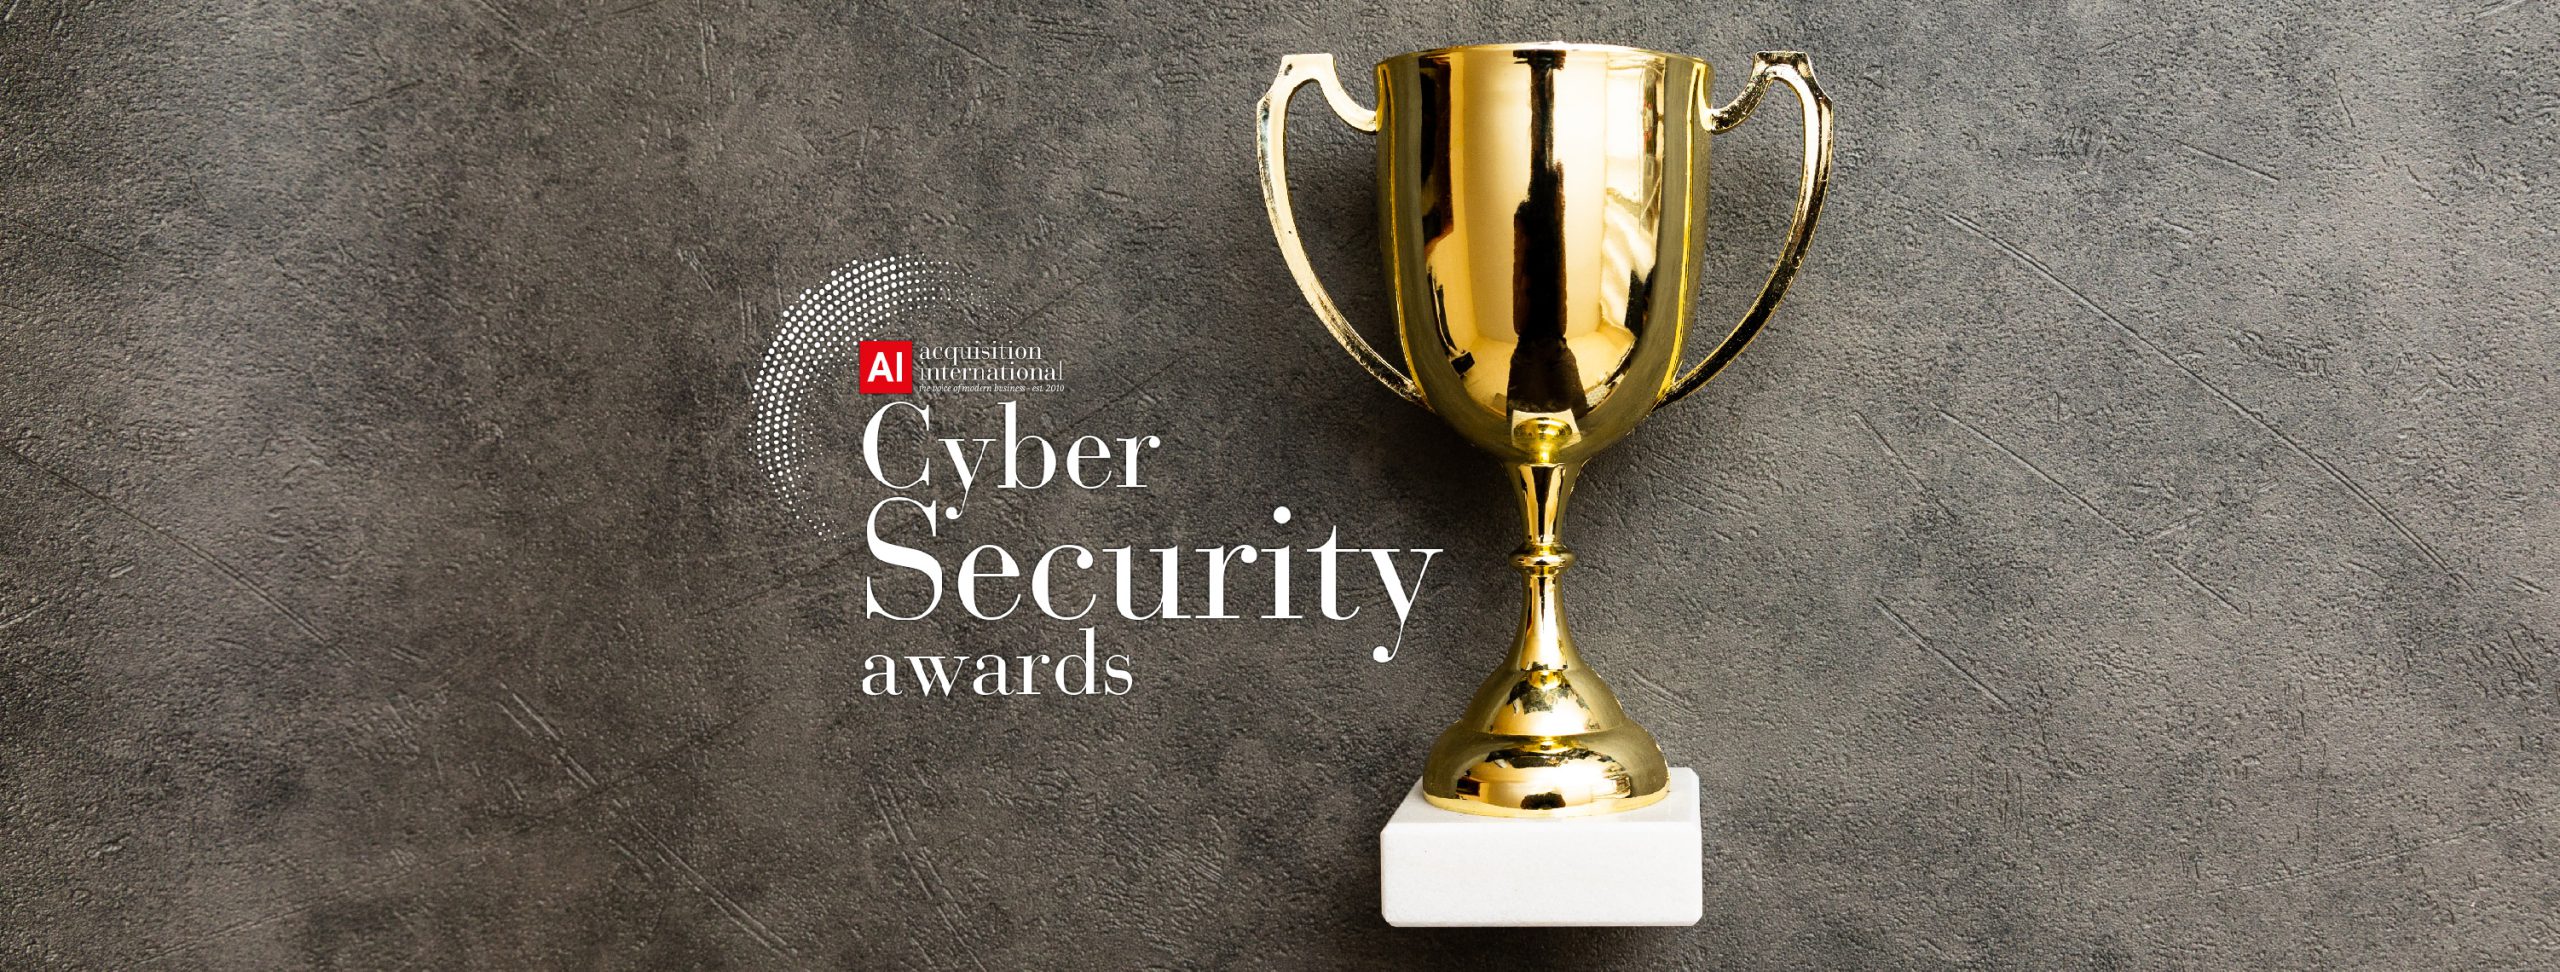 E-Tech Second Year in Row recognized as Leaders in Cyber Security Awareness Training Canada 2020